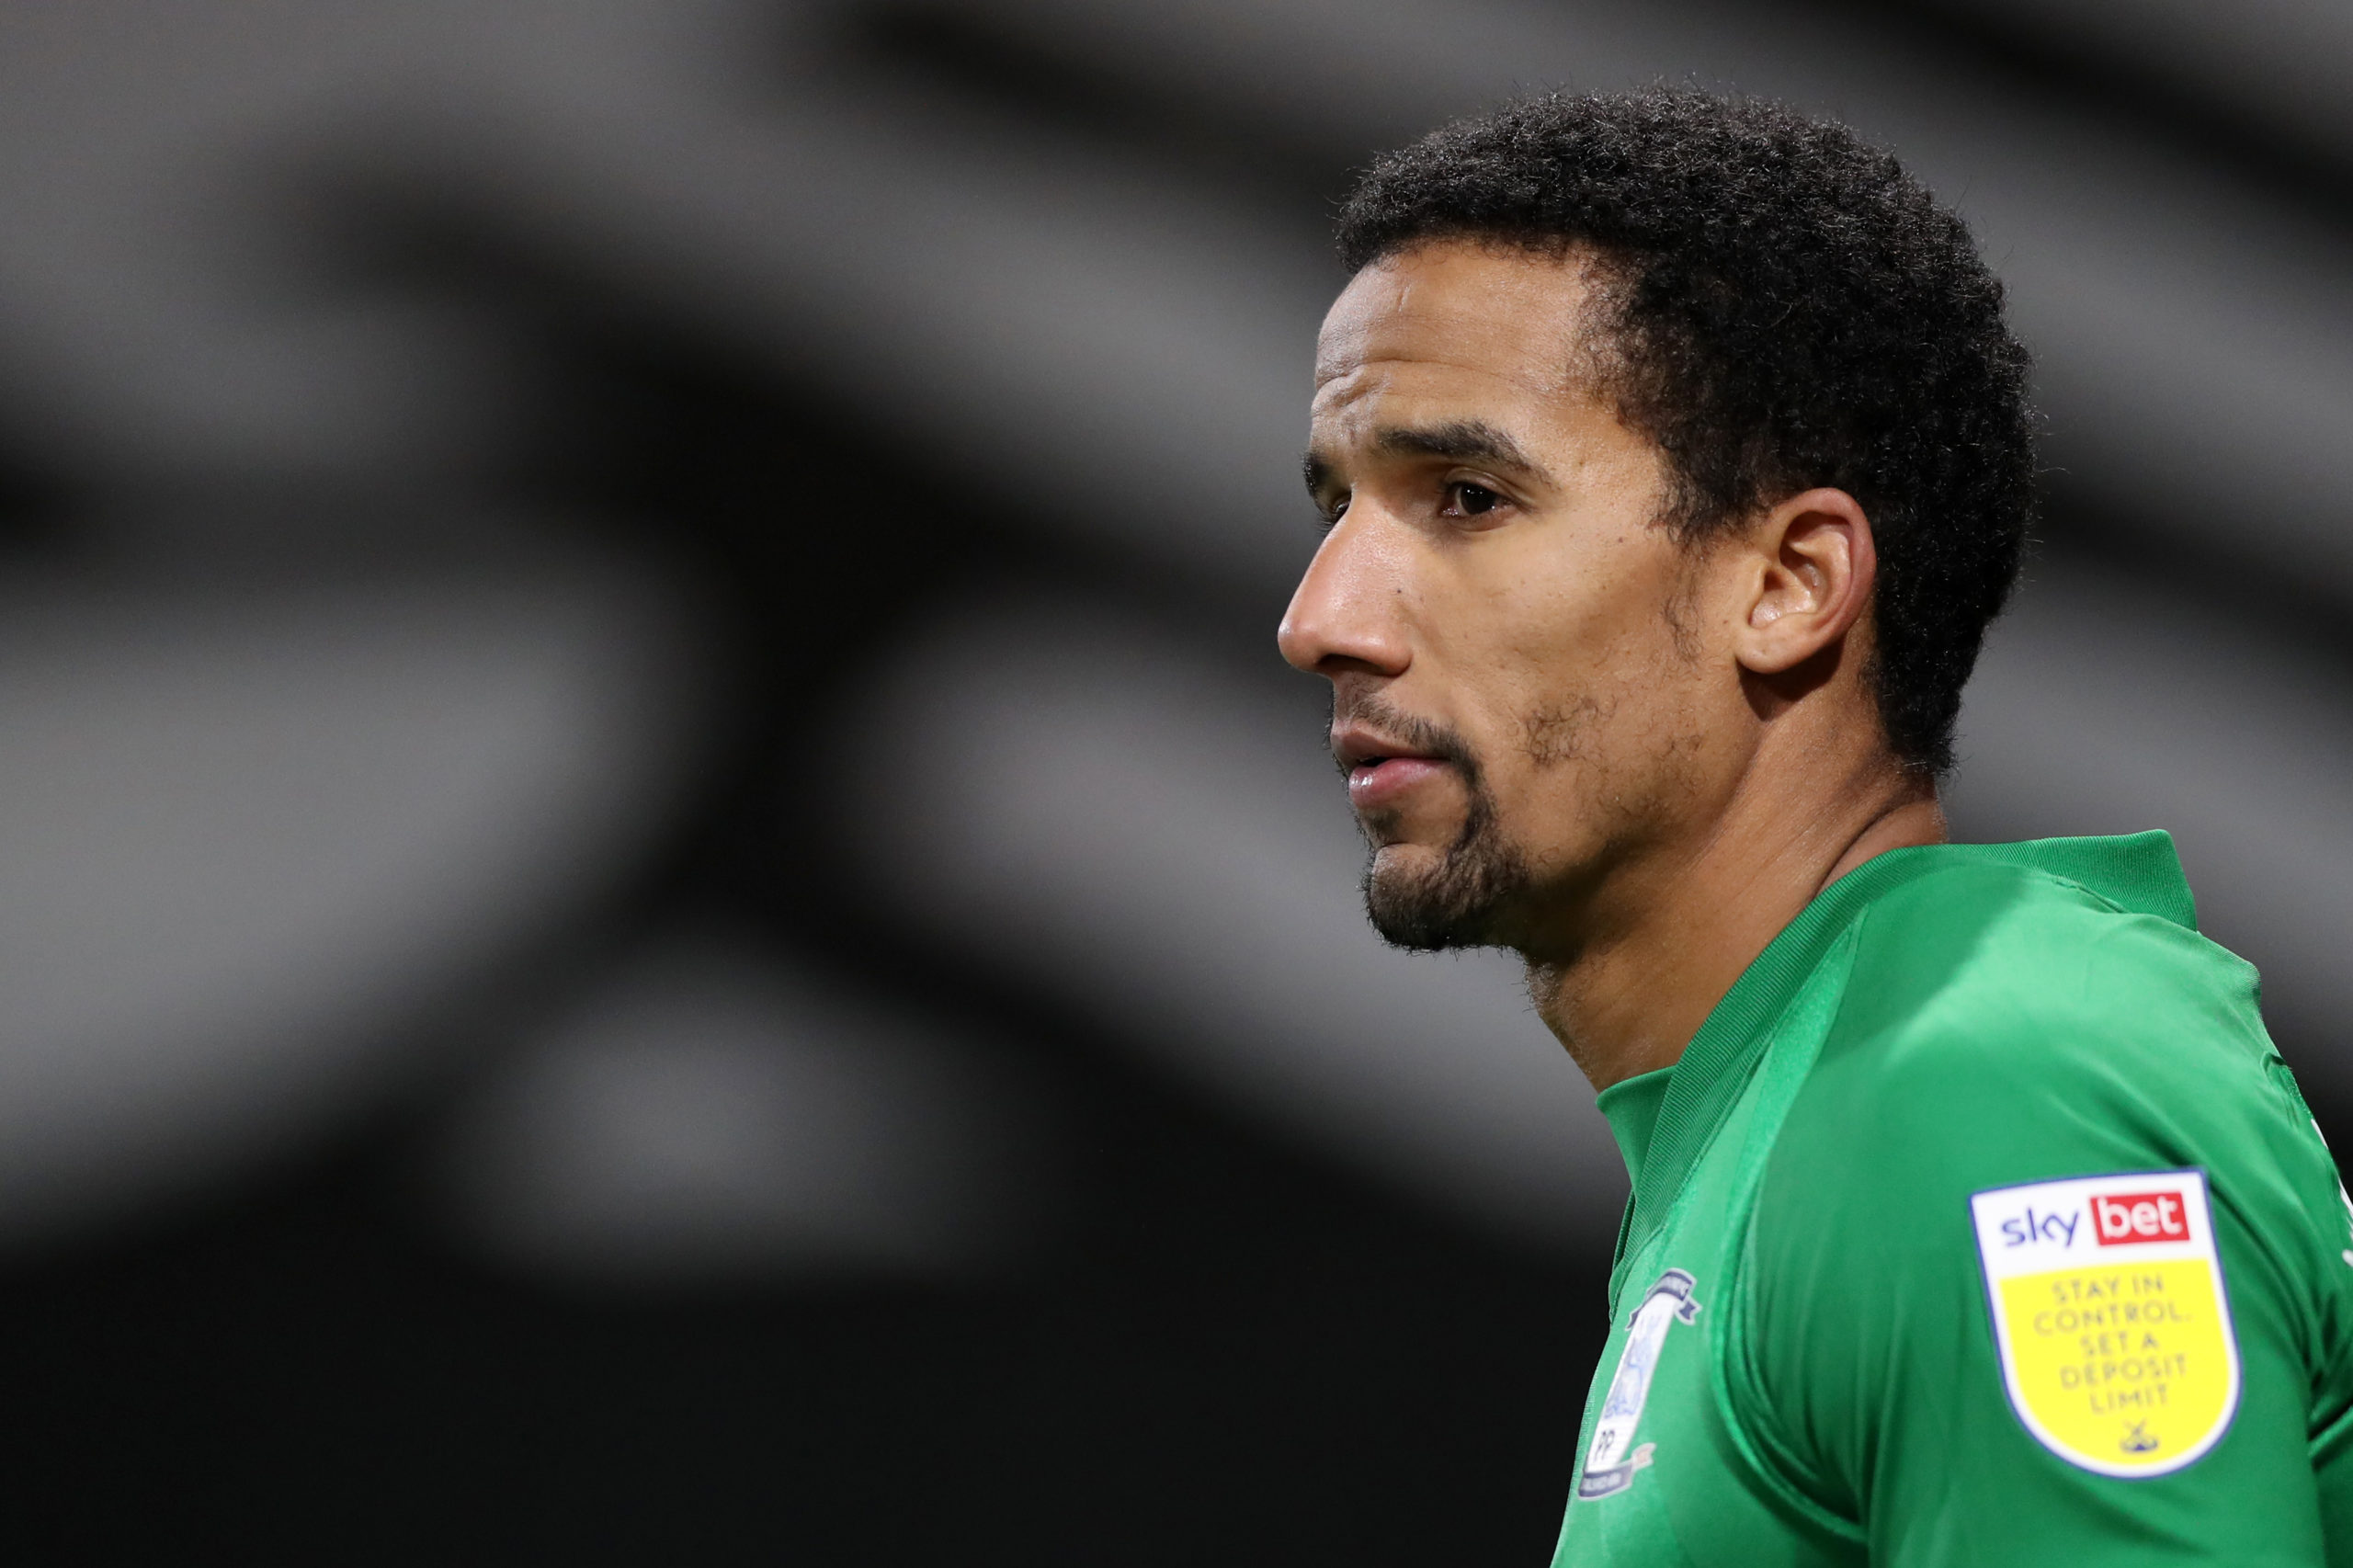 Scott Sinclair plays first game in Scotland since leaving Celtic